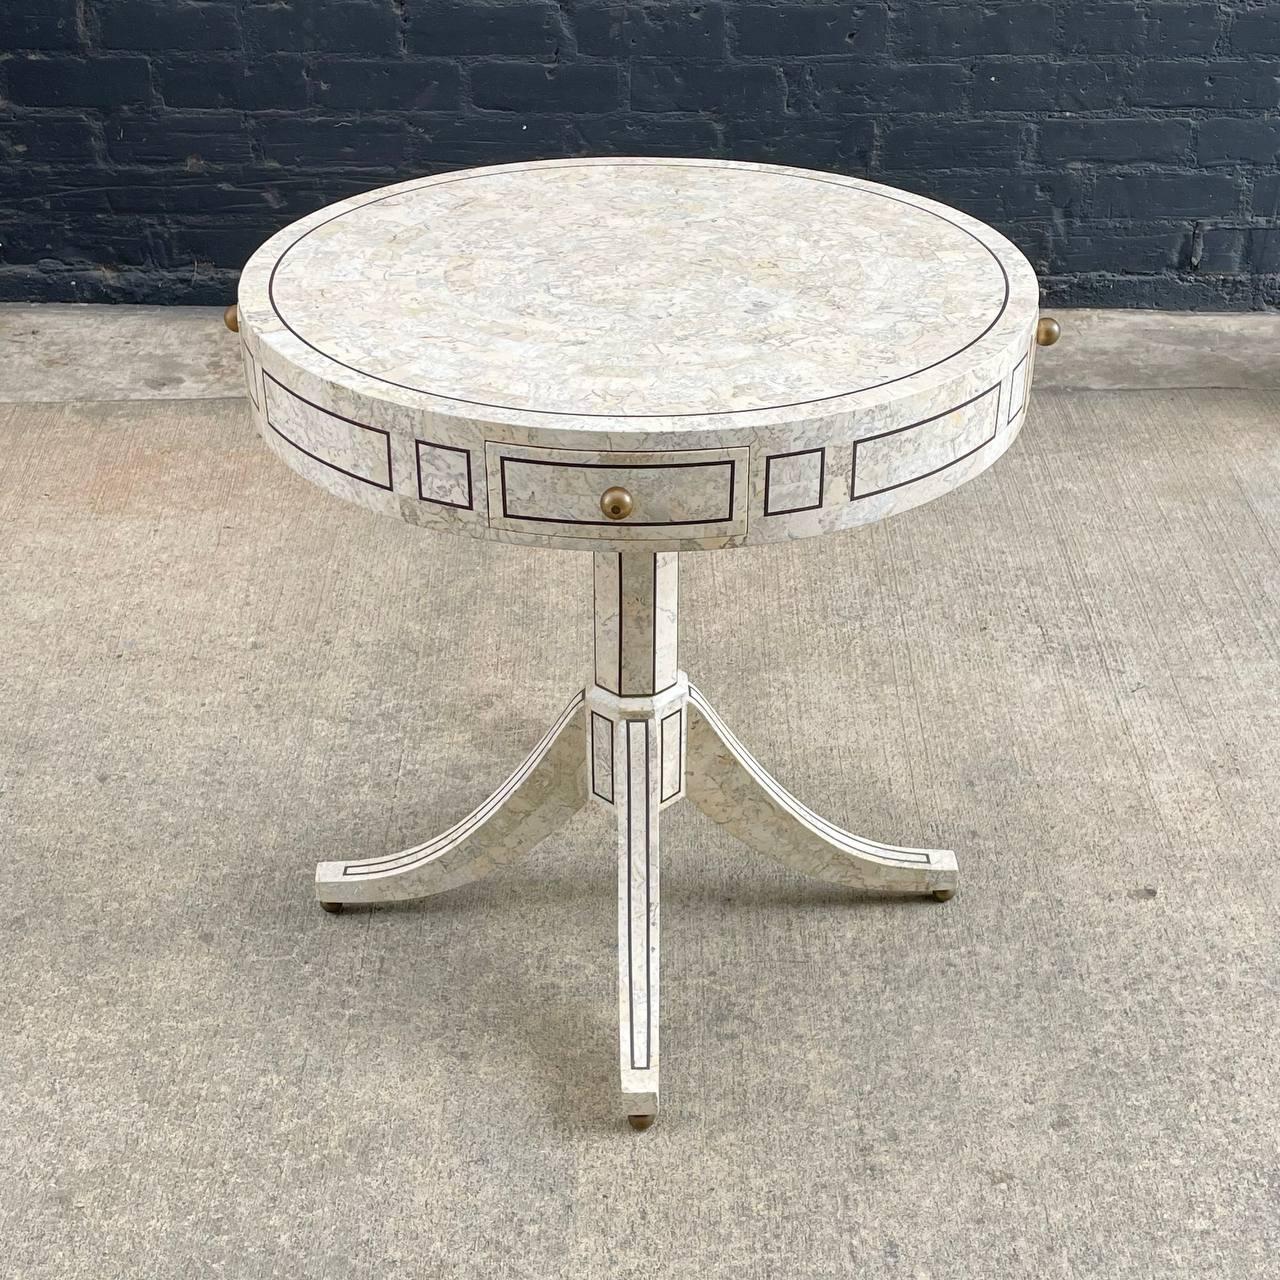 Vintage Tessellated Pedestal Drum Table by Maitland Smith

Country: United States
Materials: Wood, Brass, Stone
Condition: Original Vintage Condition
Style: French Neoclassical
Year: 1950s

$2,500

Dimensions:
29.25”H x 28.25”W x 28.25”D